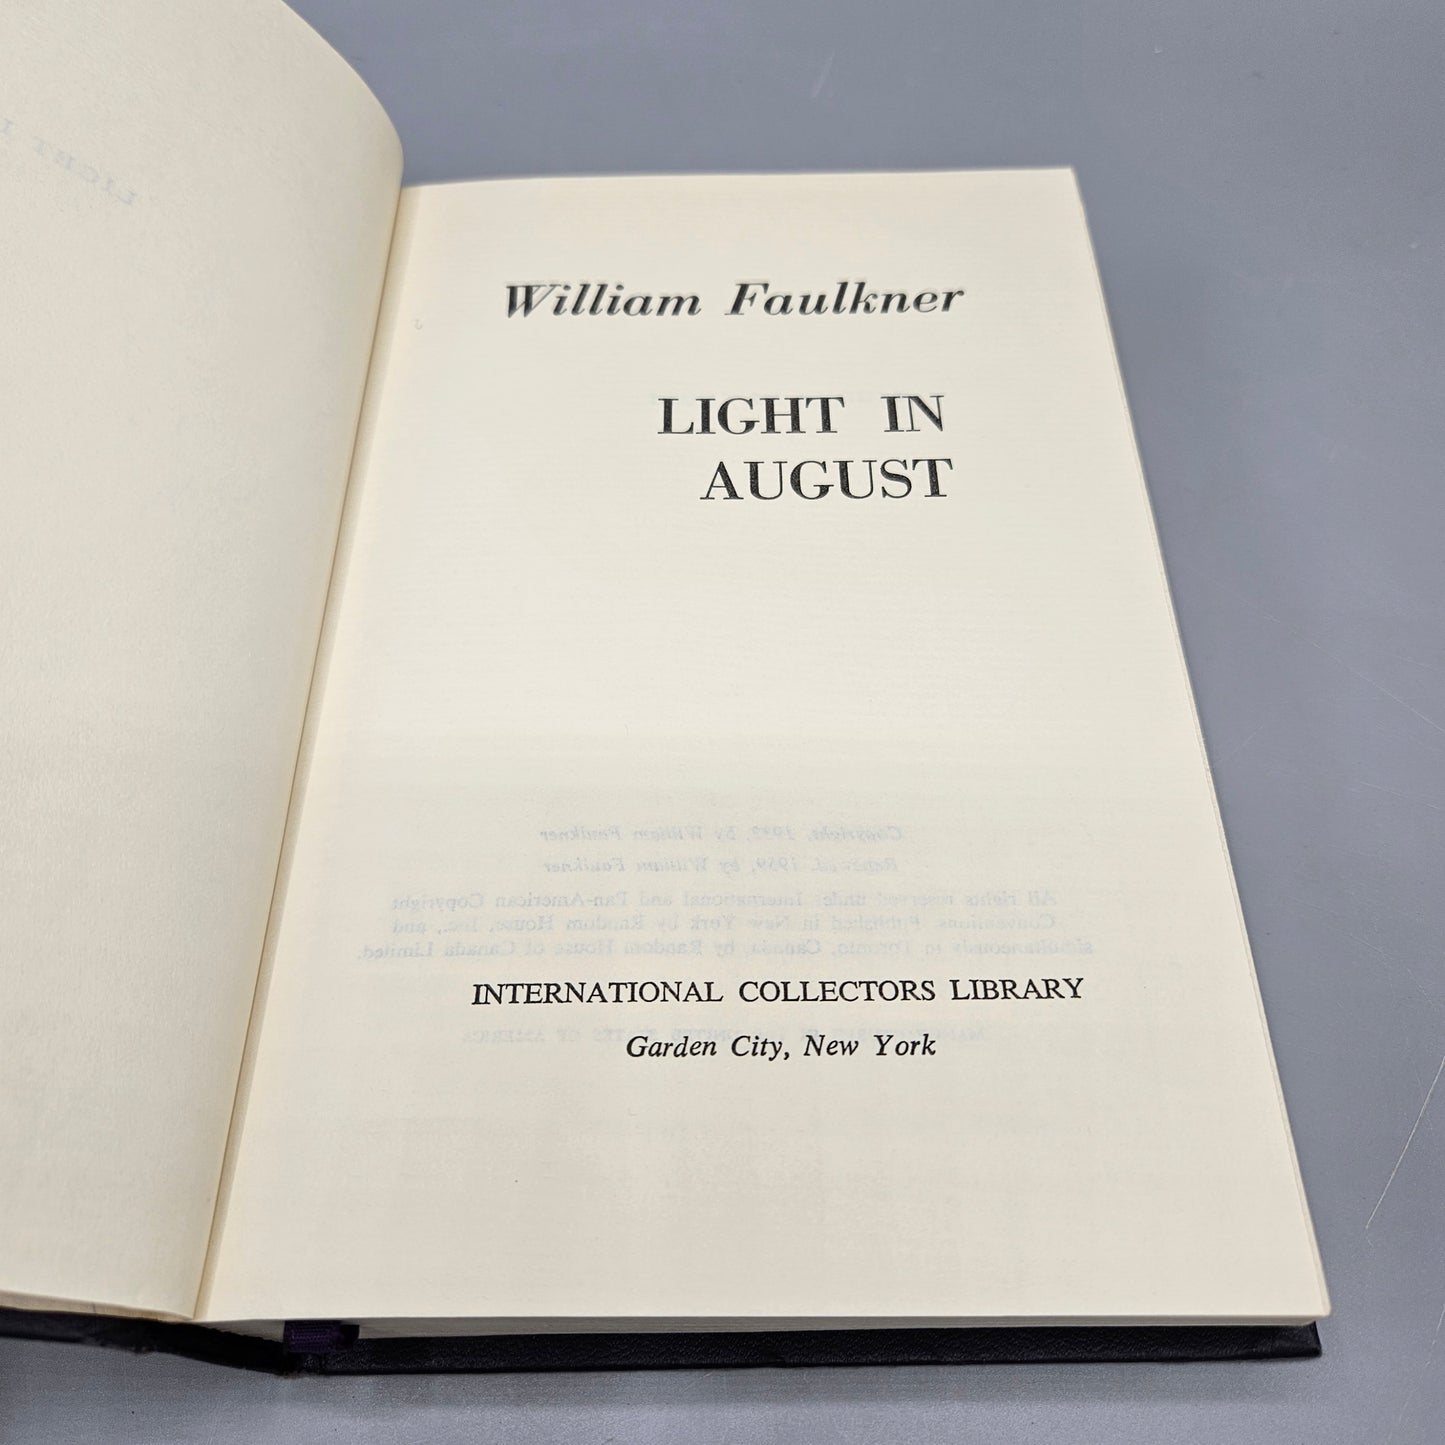 William Faulkner "Light in August" International Collectors Library